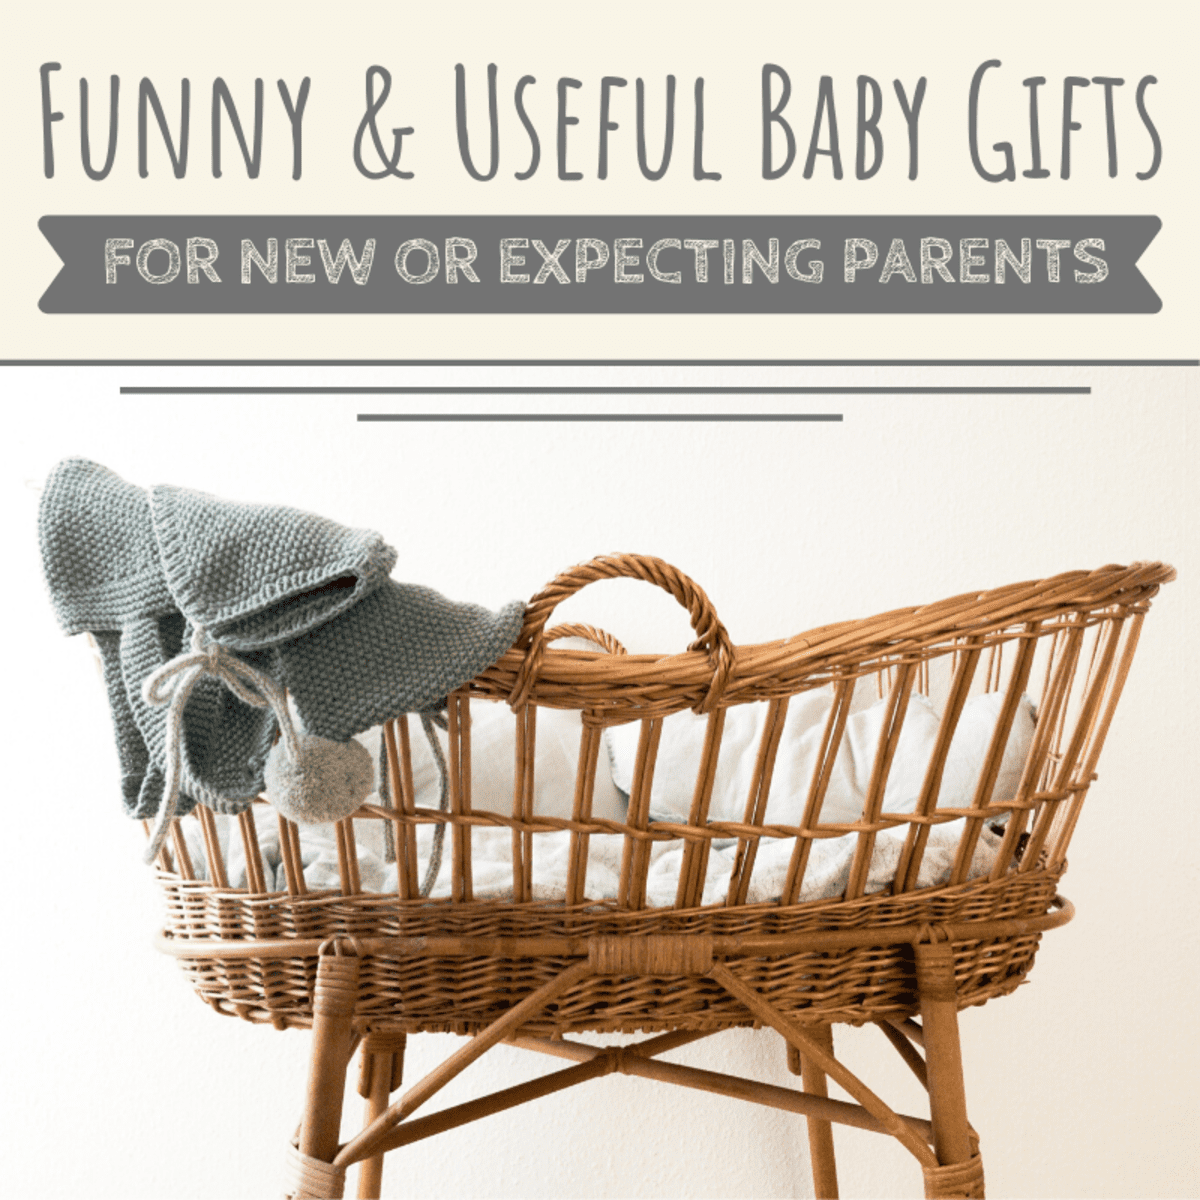 The Most Practical Gifts for New Baby - Simply Every